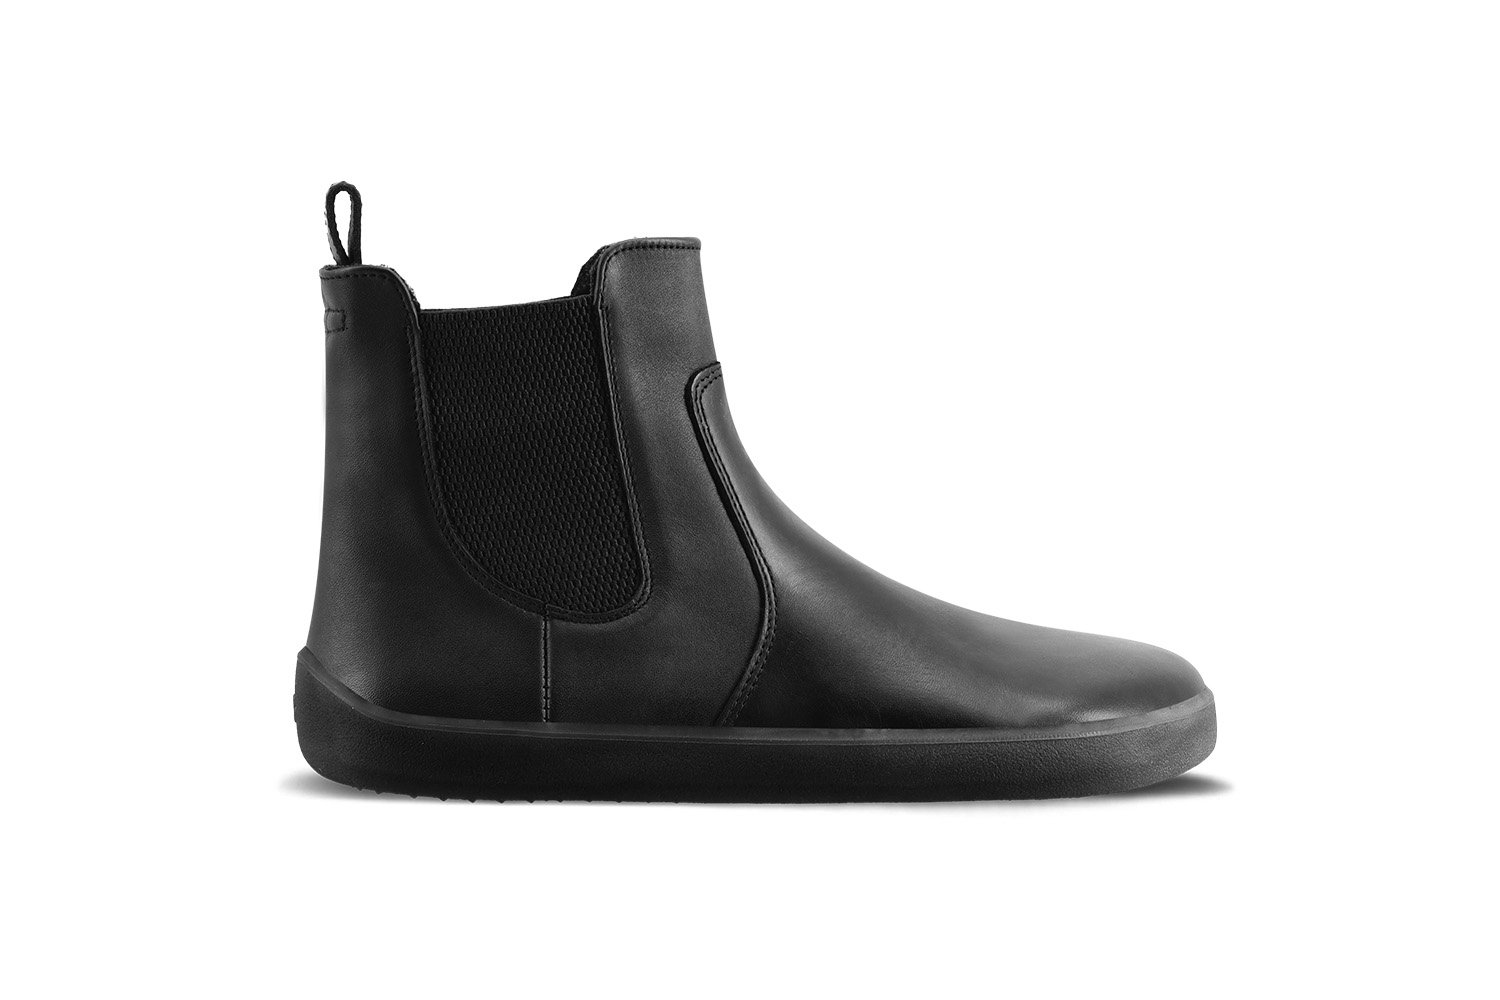 Barefoot chelsea boots for every men - Magical Shoes